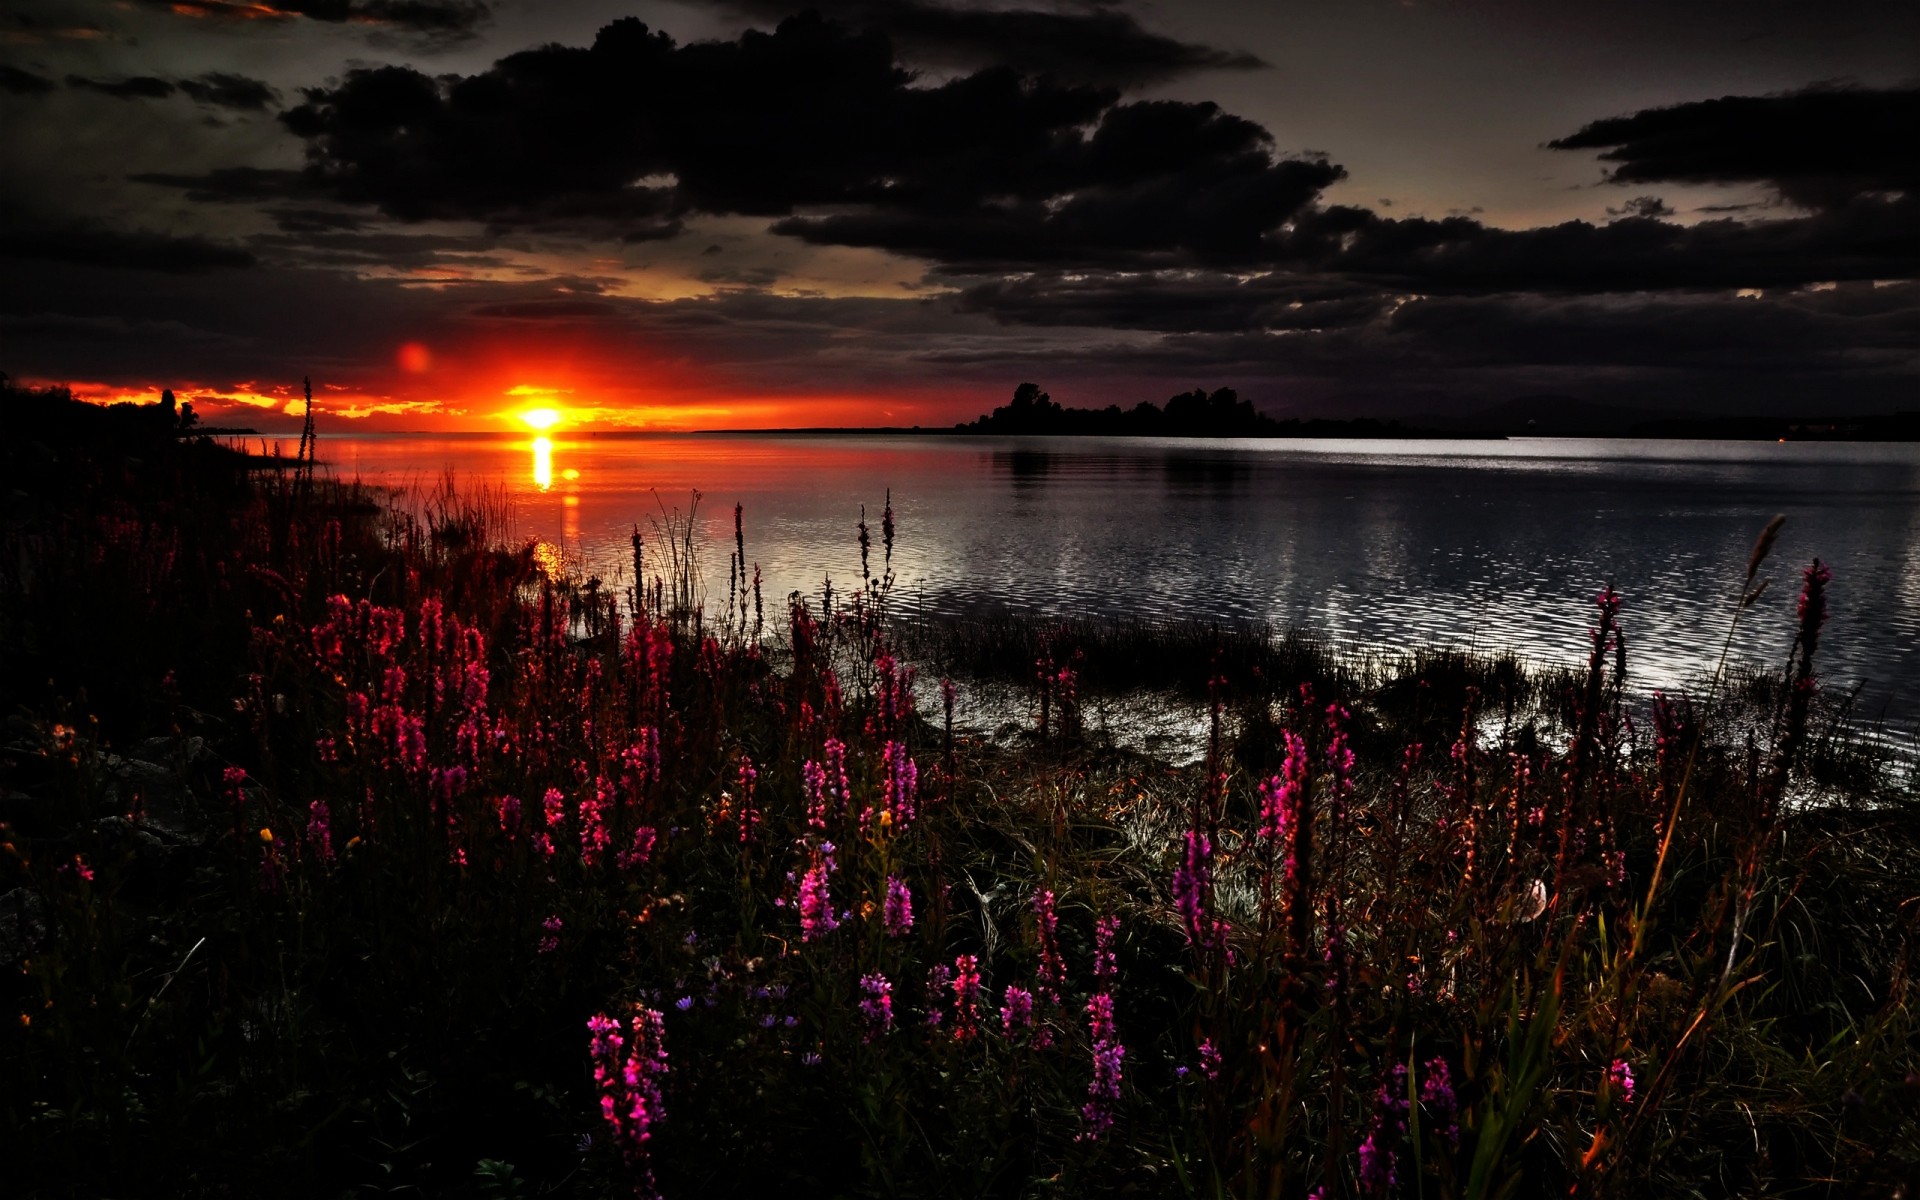 landscapes sunset dawn water dusk evening landscape outdoors sun lake light sky nature flowers clouds secenery